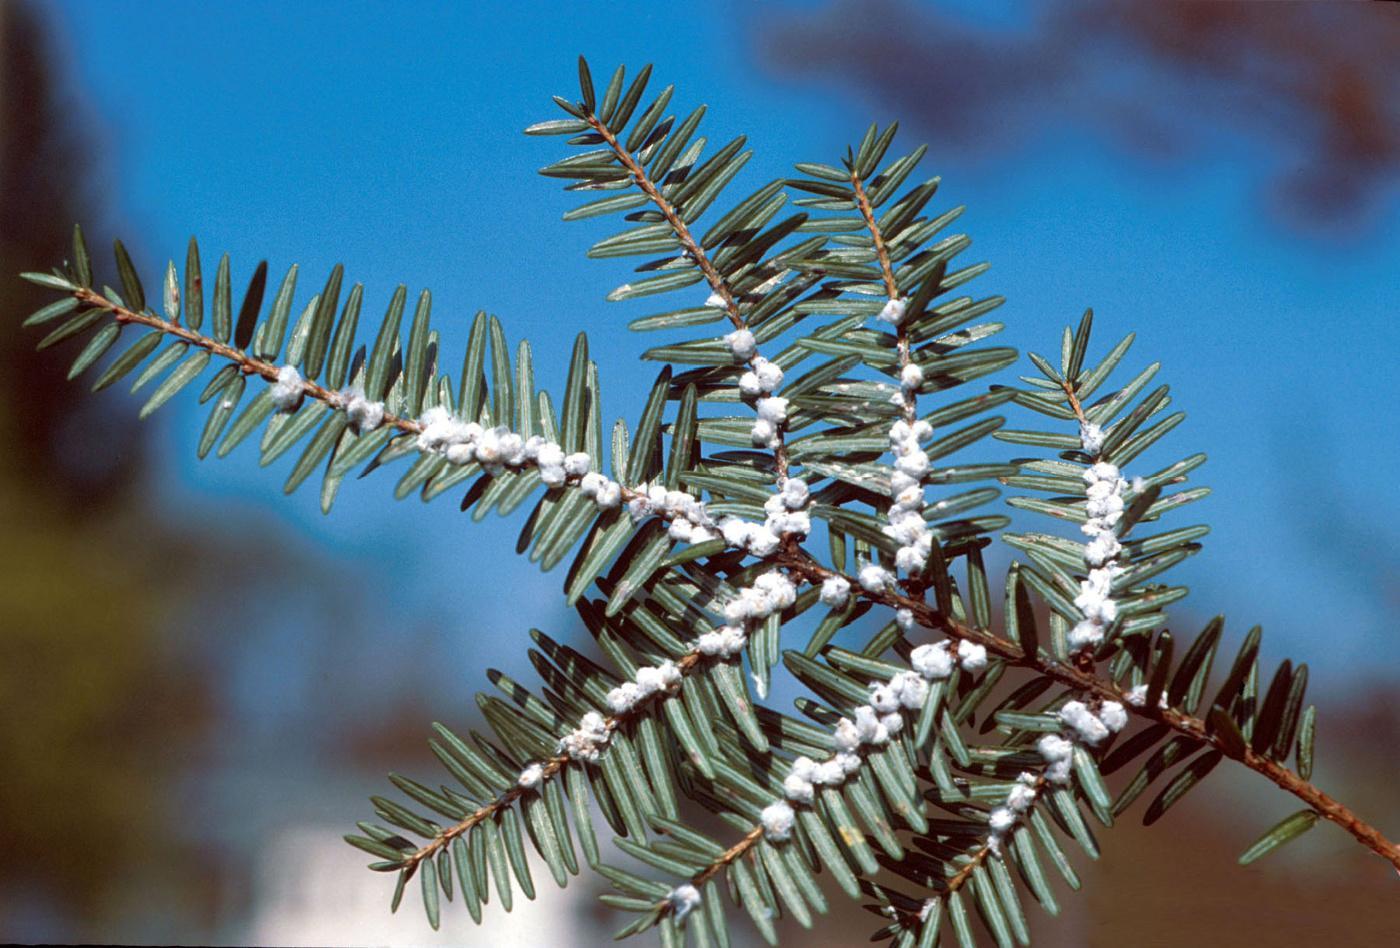 The white puffs are evidence of hemlock woolly adelgid infestation. / Michael Montgomery, USDA Forest Service